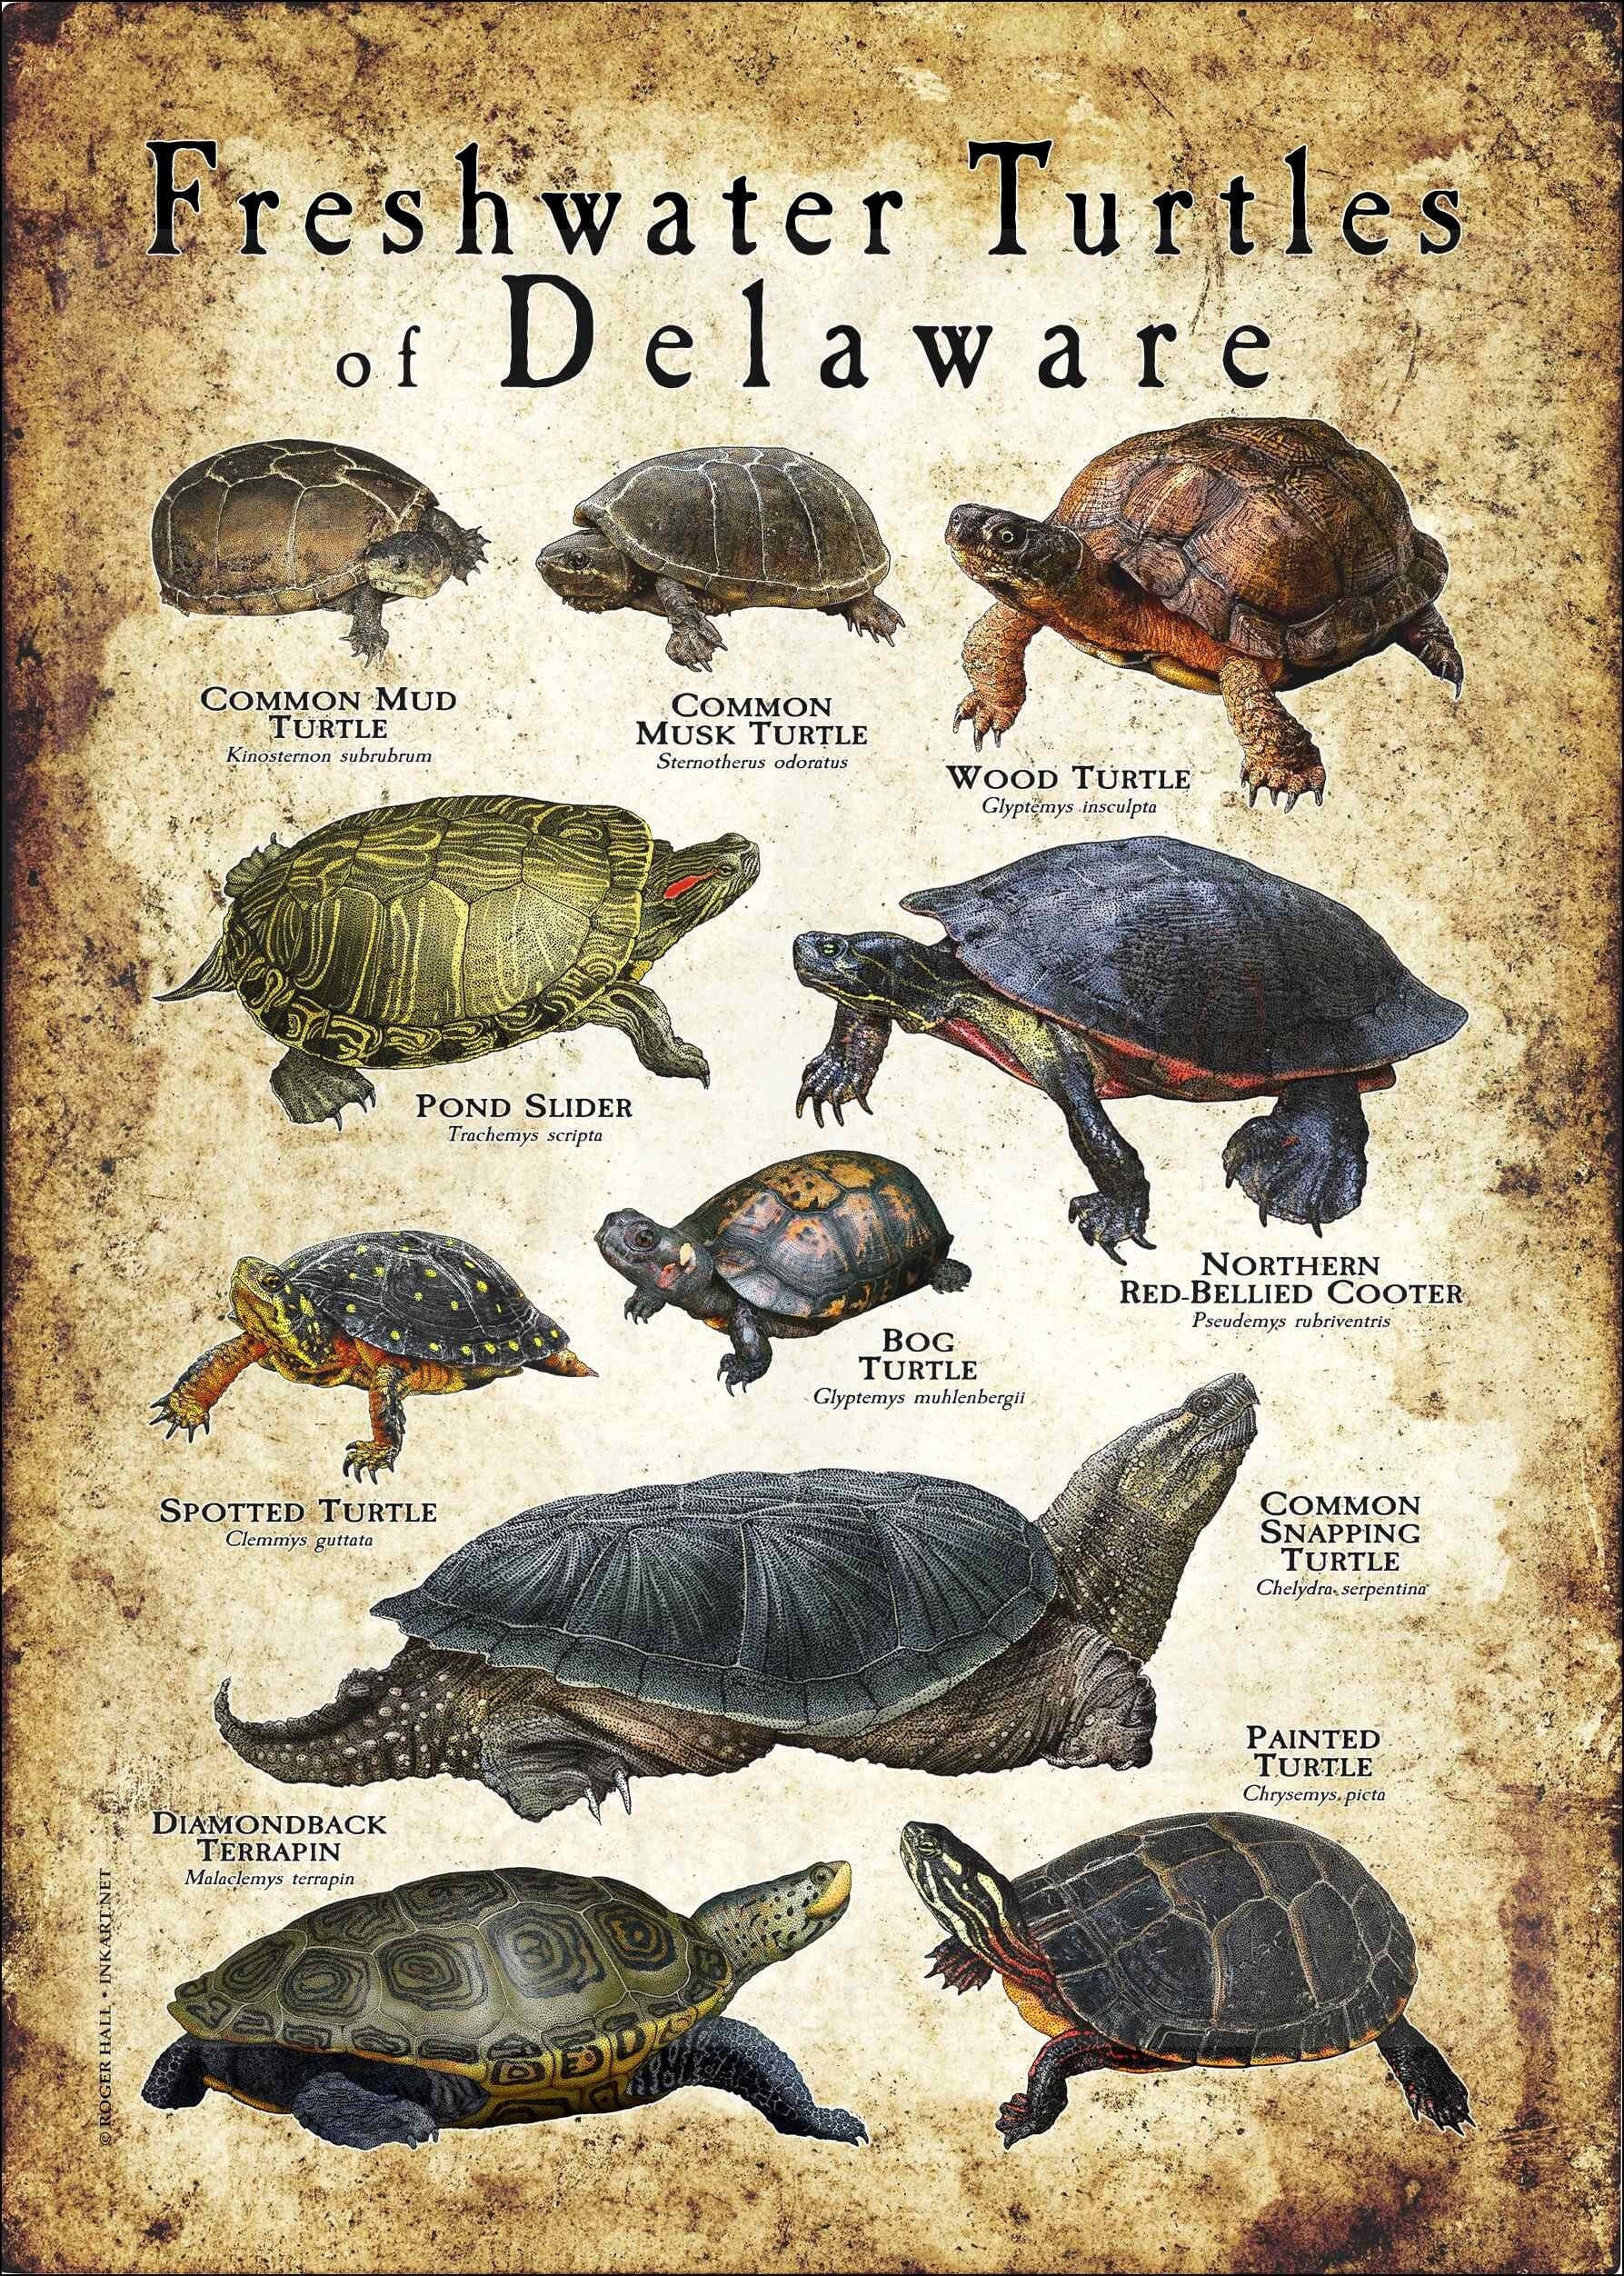 Freshwater Turtles of Delaware Poster Print Field Guide